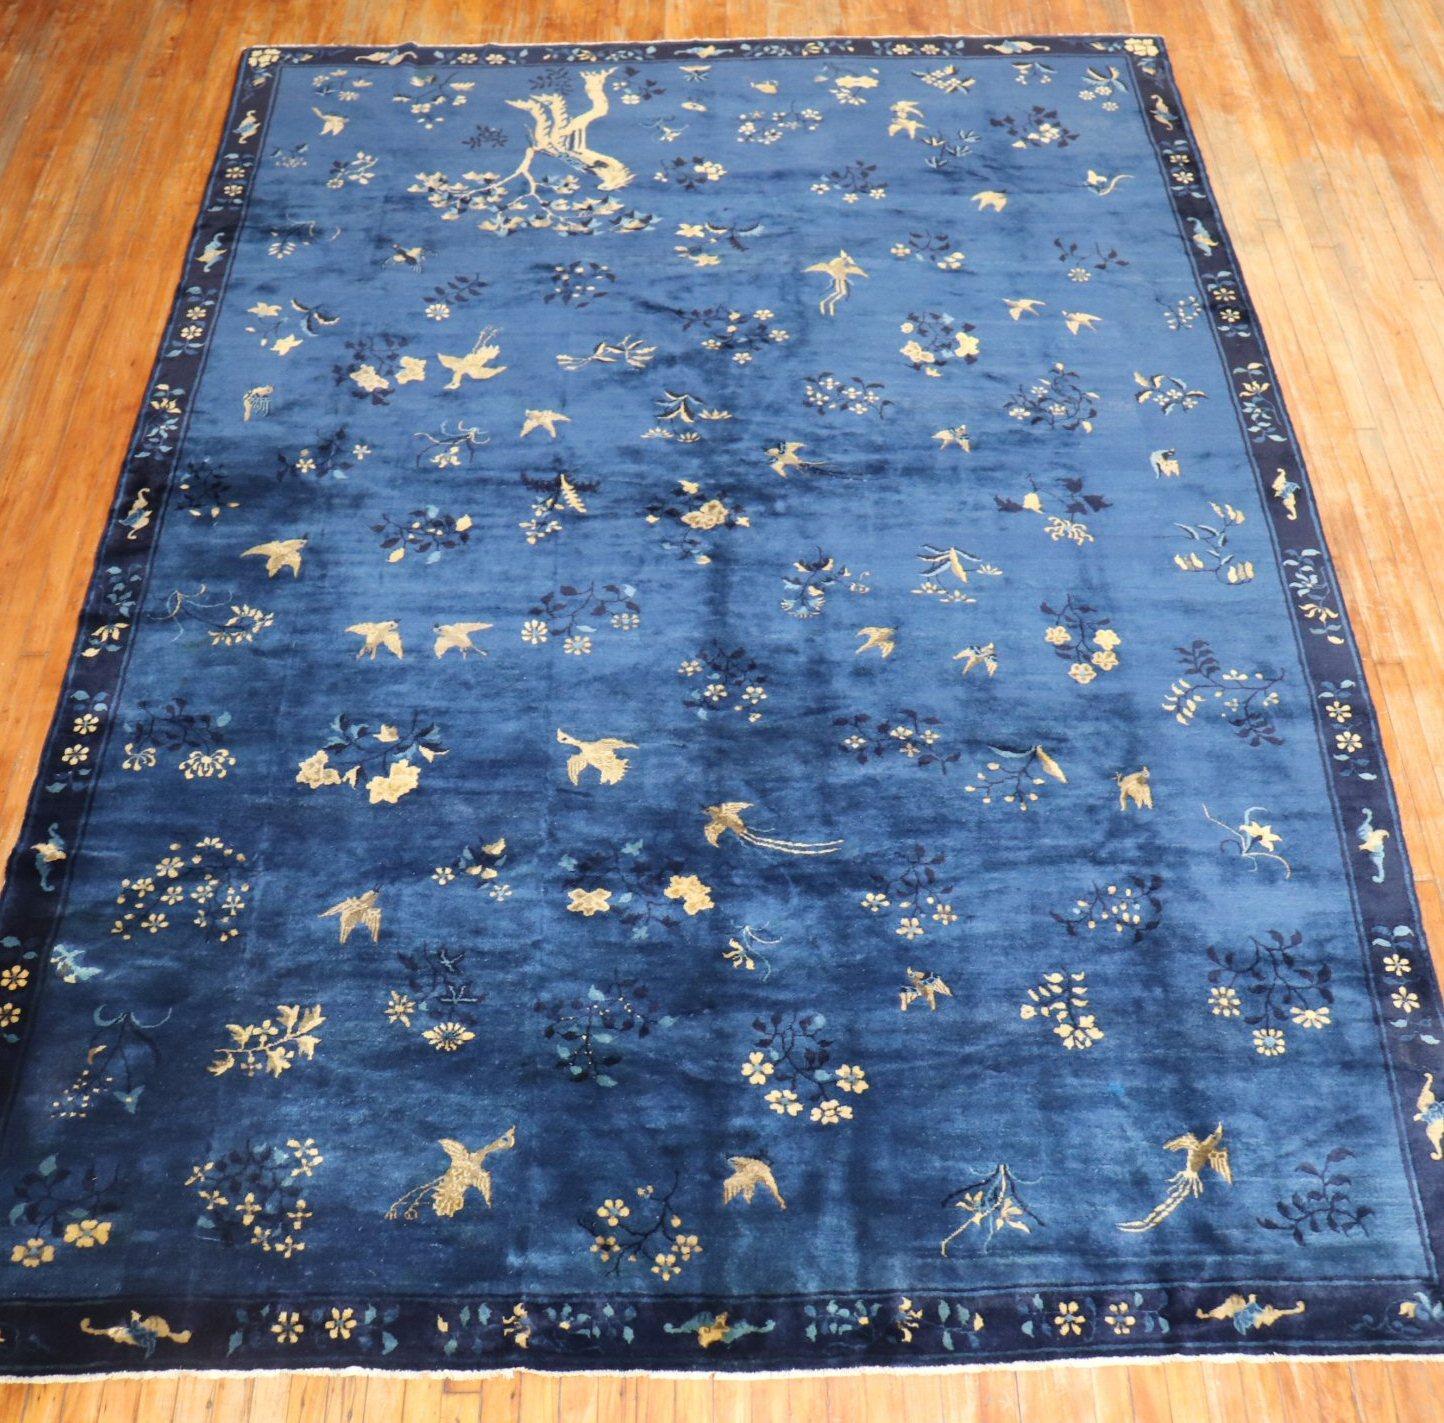 An early 20th century fine quality Chinese pictorial rug with birds and pigeons floating on a blue field

Measures: 8'6